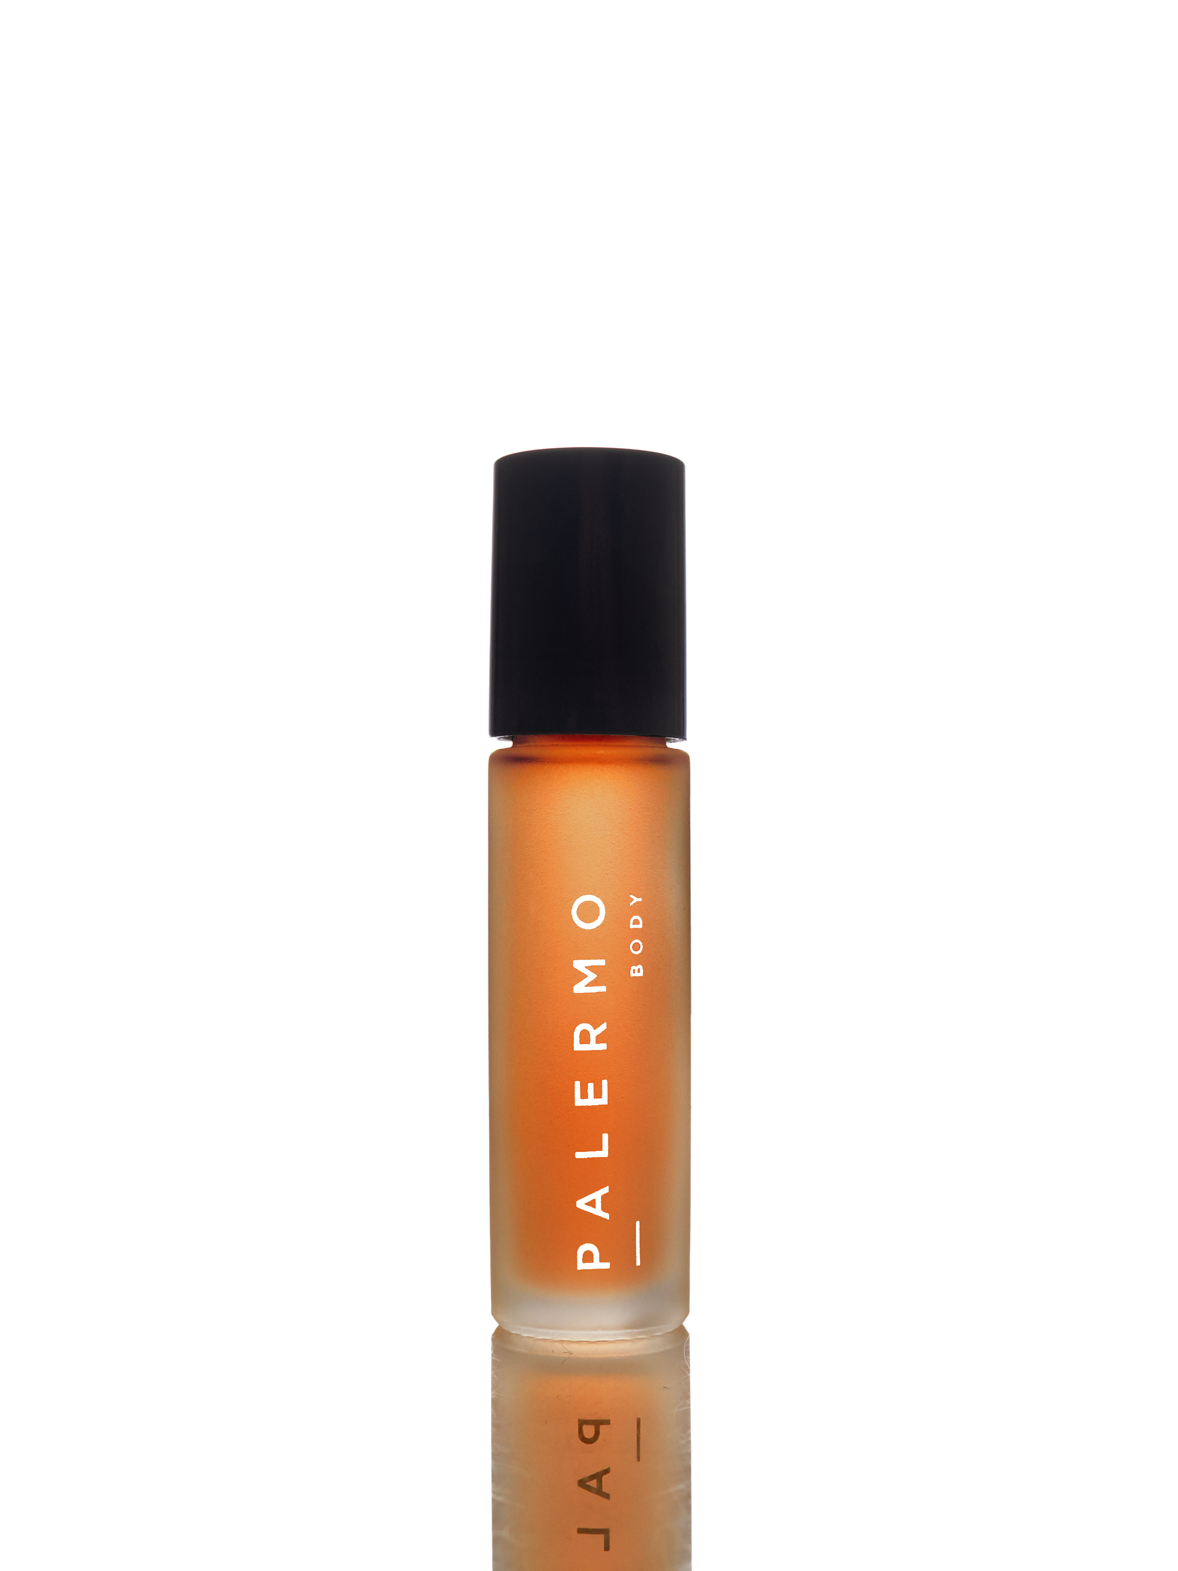 Harmonizing Aromatherapy Oil by Palermo Body - Lotus and Willow